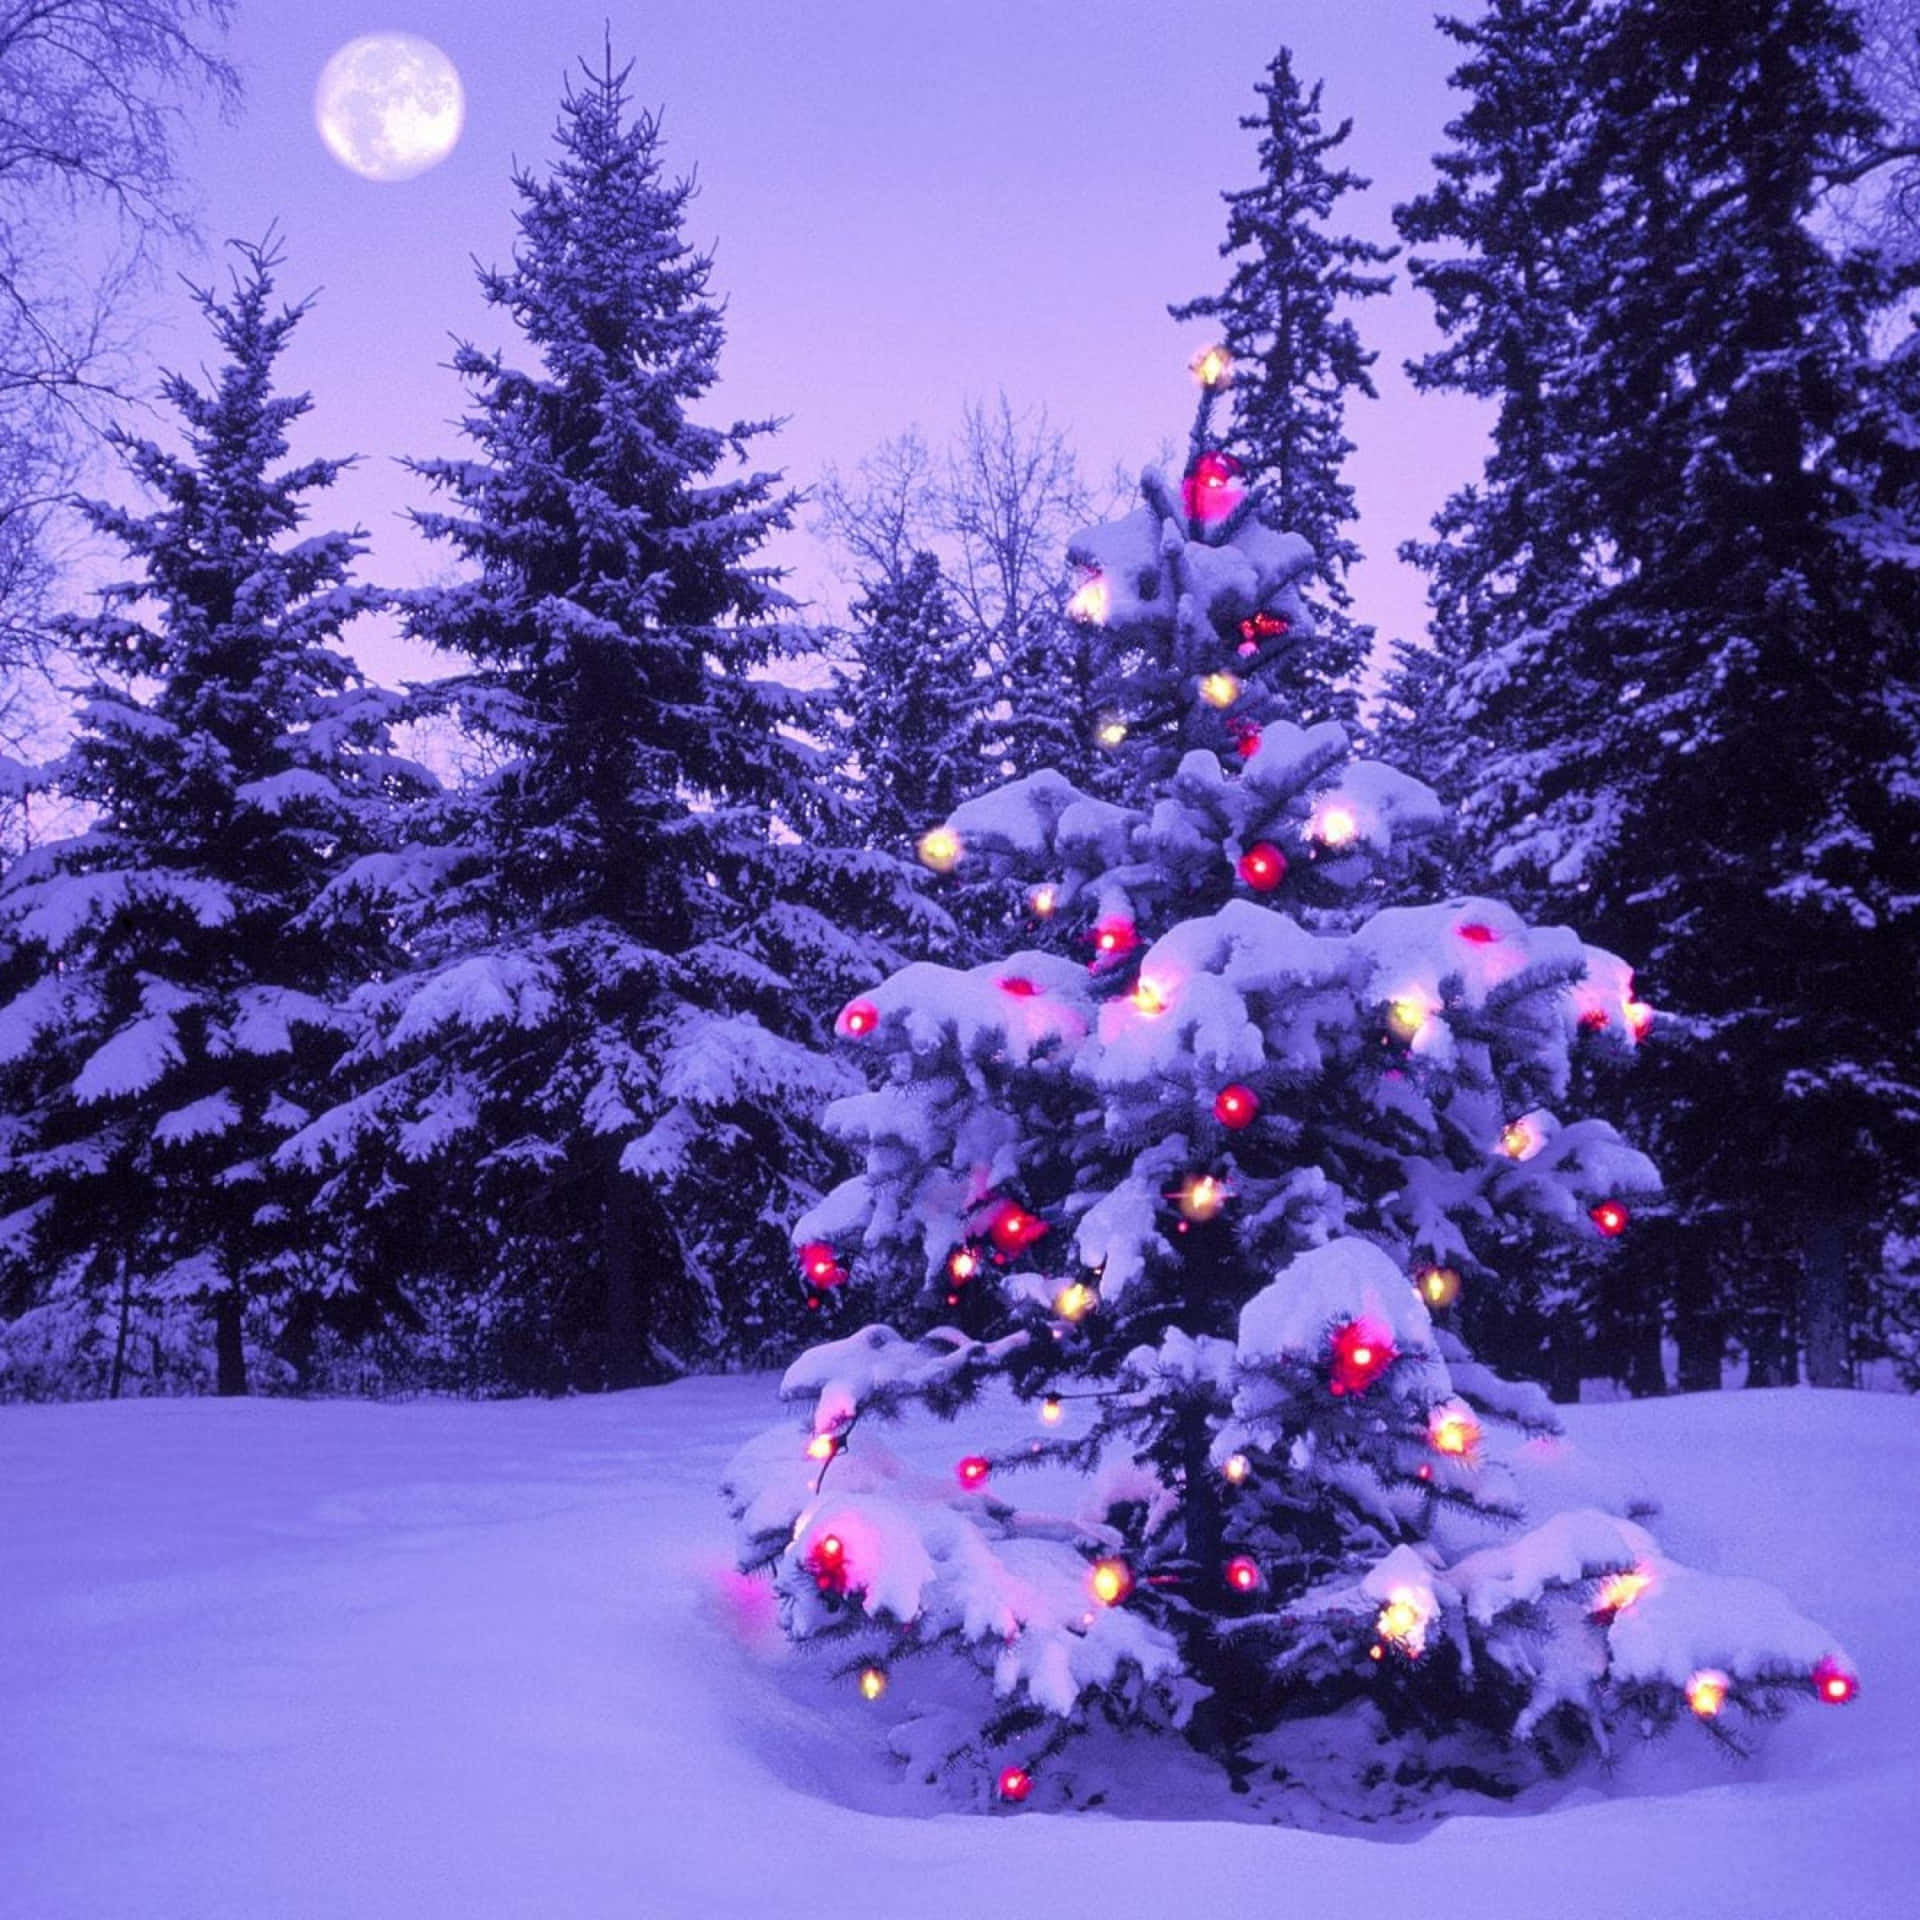 A Christmas Tree In The Snow With A Full Moon Wallpaper